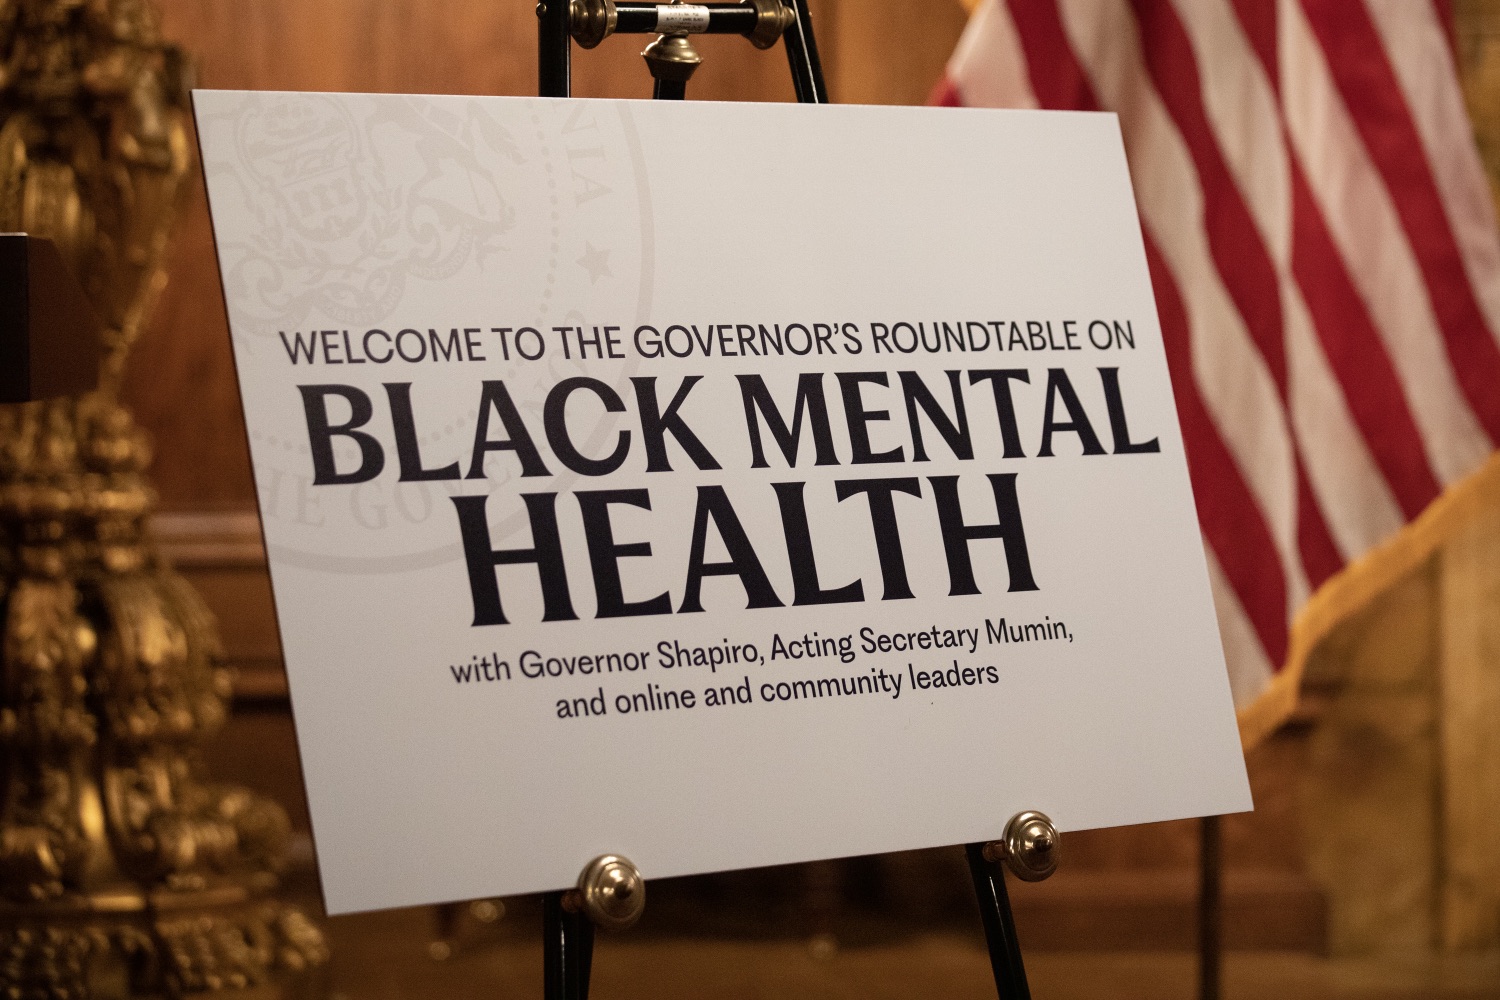 Governor Shapiro leads a roundtable discussion on Black mental health with content creators, community leaders, and clinicians to discuss how his budget invests in mental health services for Black communities across the Commonwealth. He is joined by Acting Secretary of Education Dr. Khalid Mumin and First Lady Shapiro. Attendees include: LaToi Storr, Jasiri X, Jasmine Green, Farida Boyer, Stephen Sharp, Julius Boatwright, Johnnie Geathers, Dr. Channing L. Moreland, and Jessica Gurley. Pictured here is a moment from the roundtable discussion.<br><a href="https://filesource.amperwave.net/commonwealthofpa/photo/23156_Gov_Black_Mental_Health_JP_08.jpg" target="_blank">⇣ Download Photo</a>